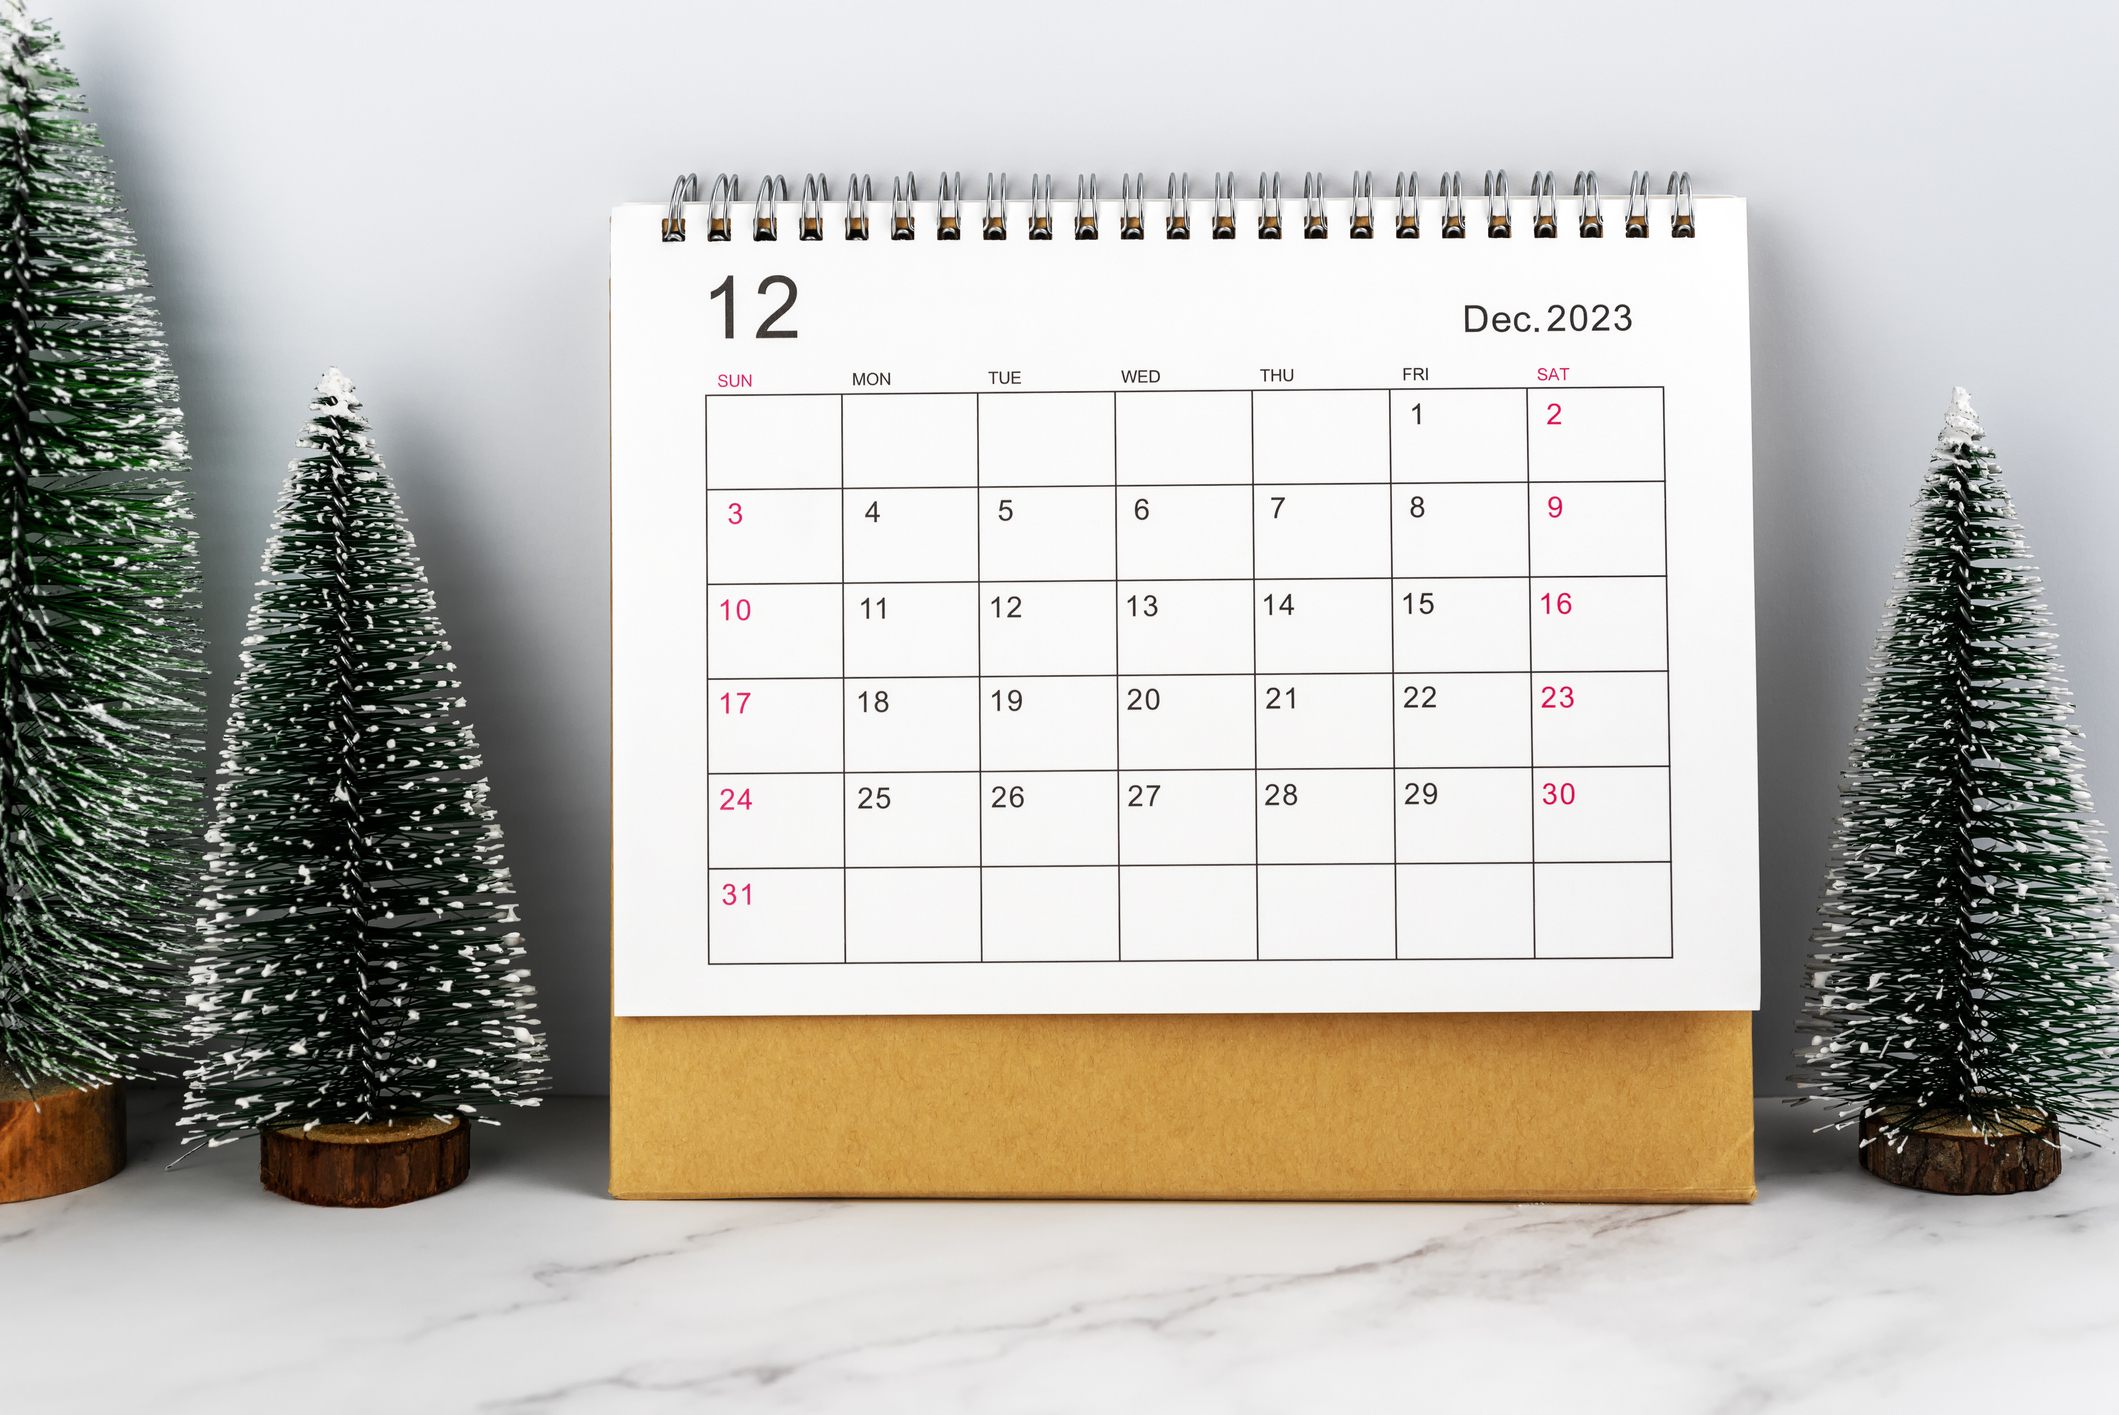 A calendar showing December 2023, with small pine trees next to it